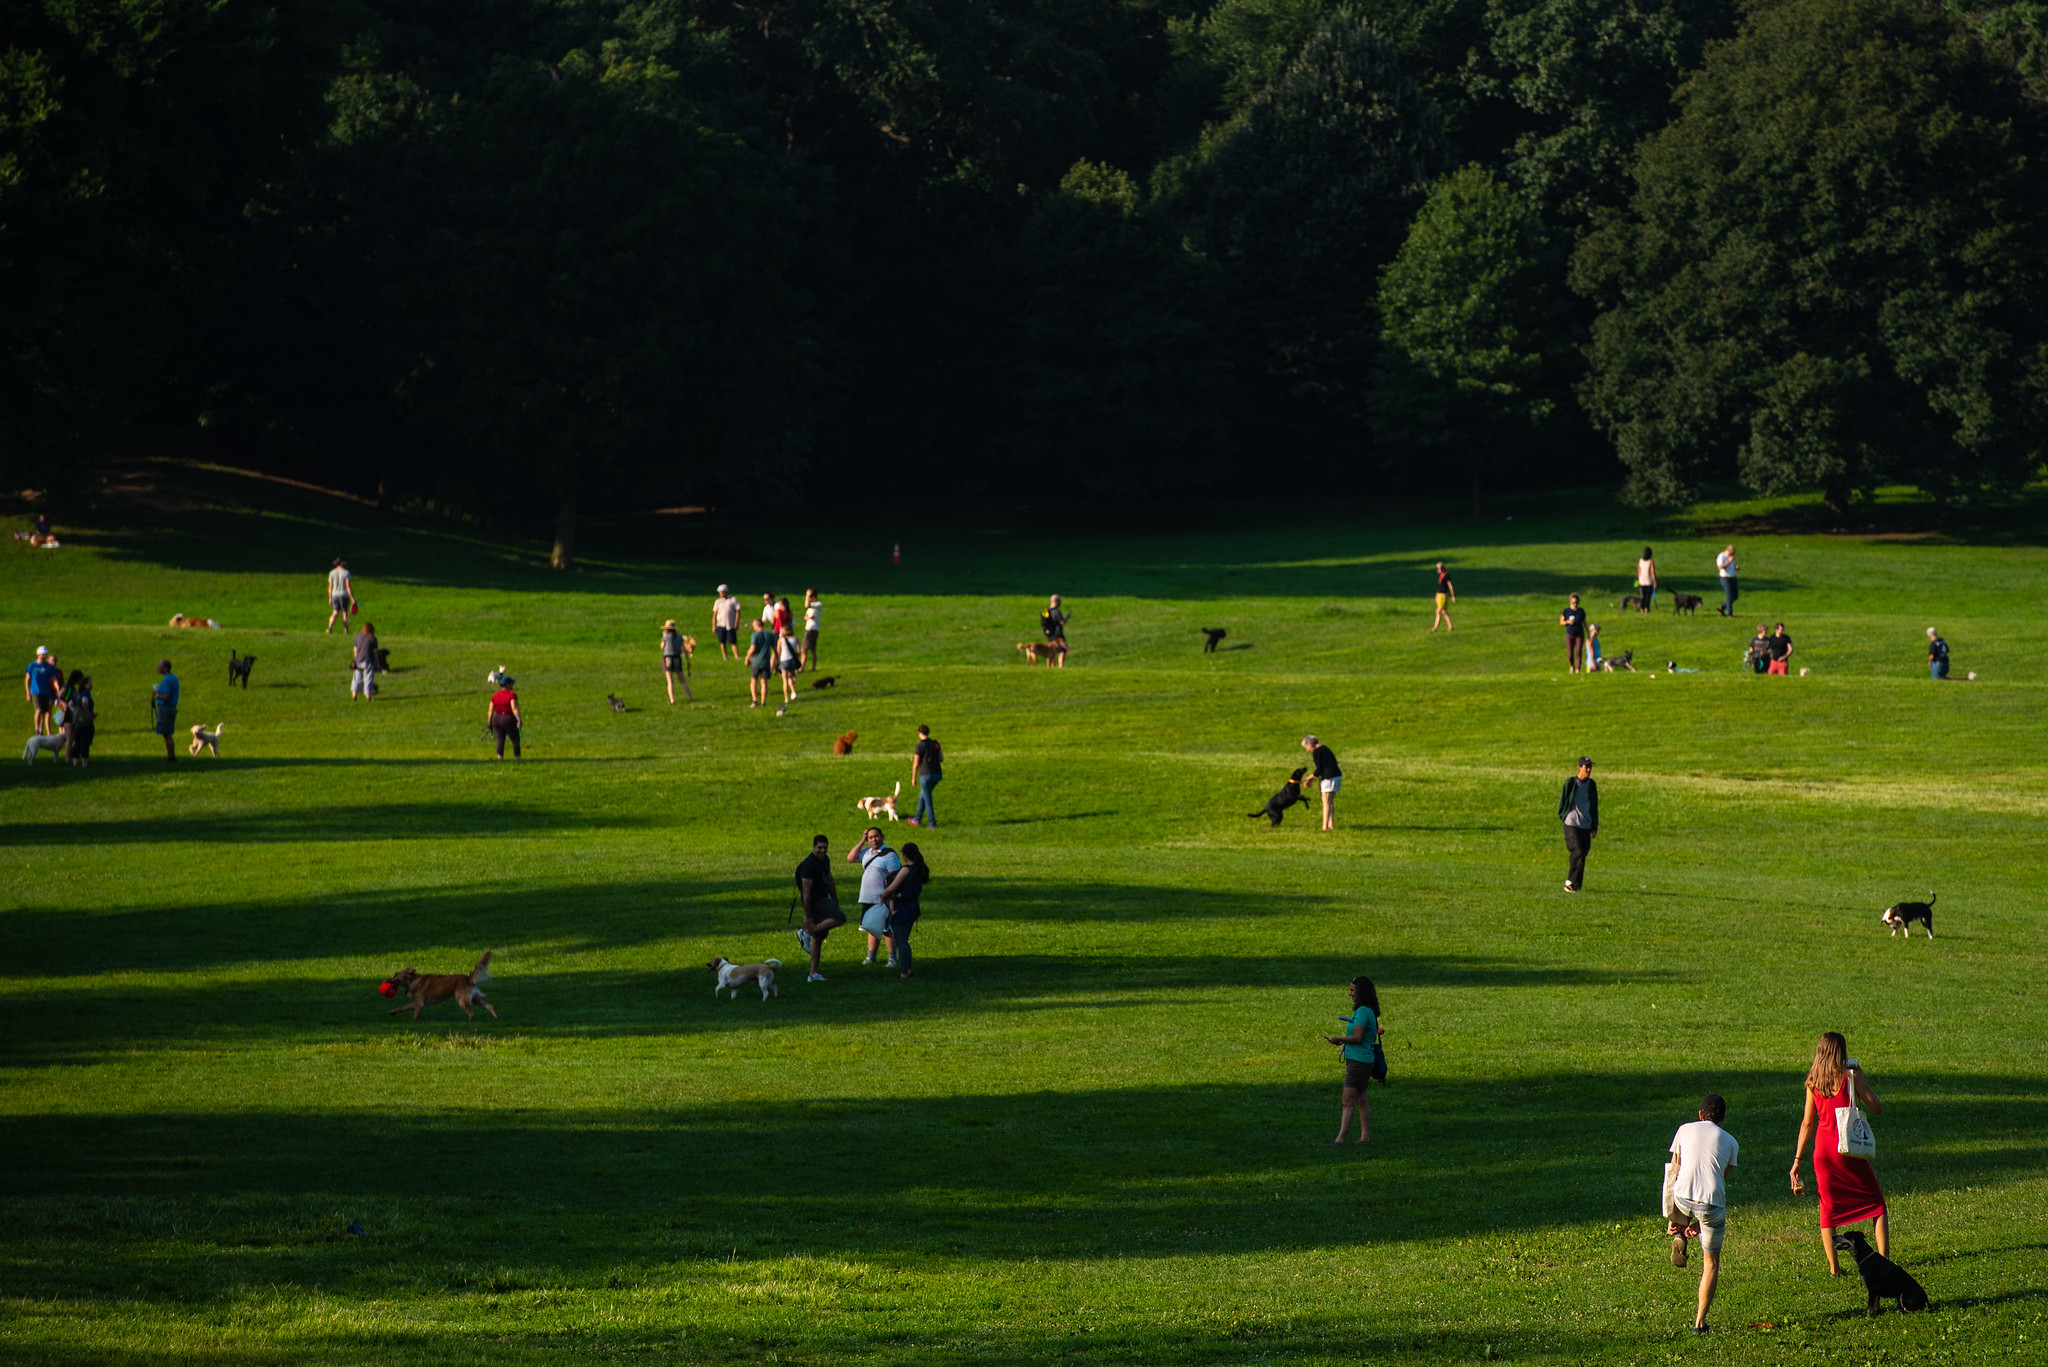 People and their dogs on a stretch of lawn in Prospect Park.